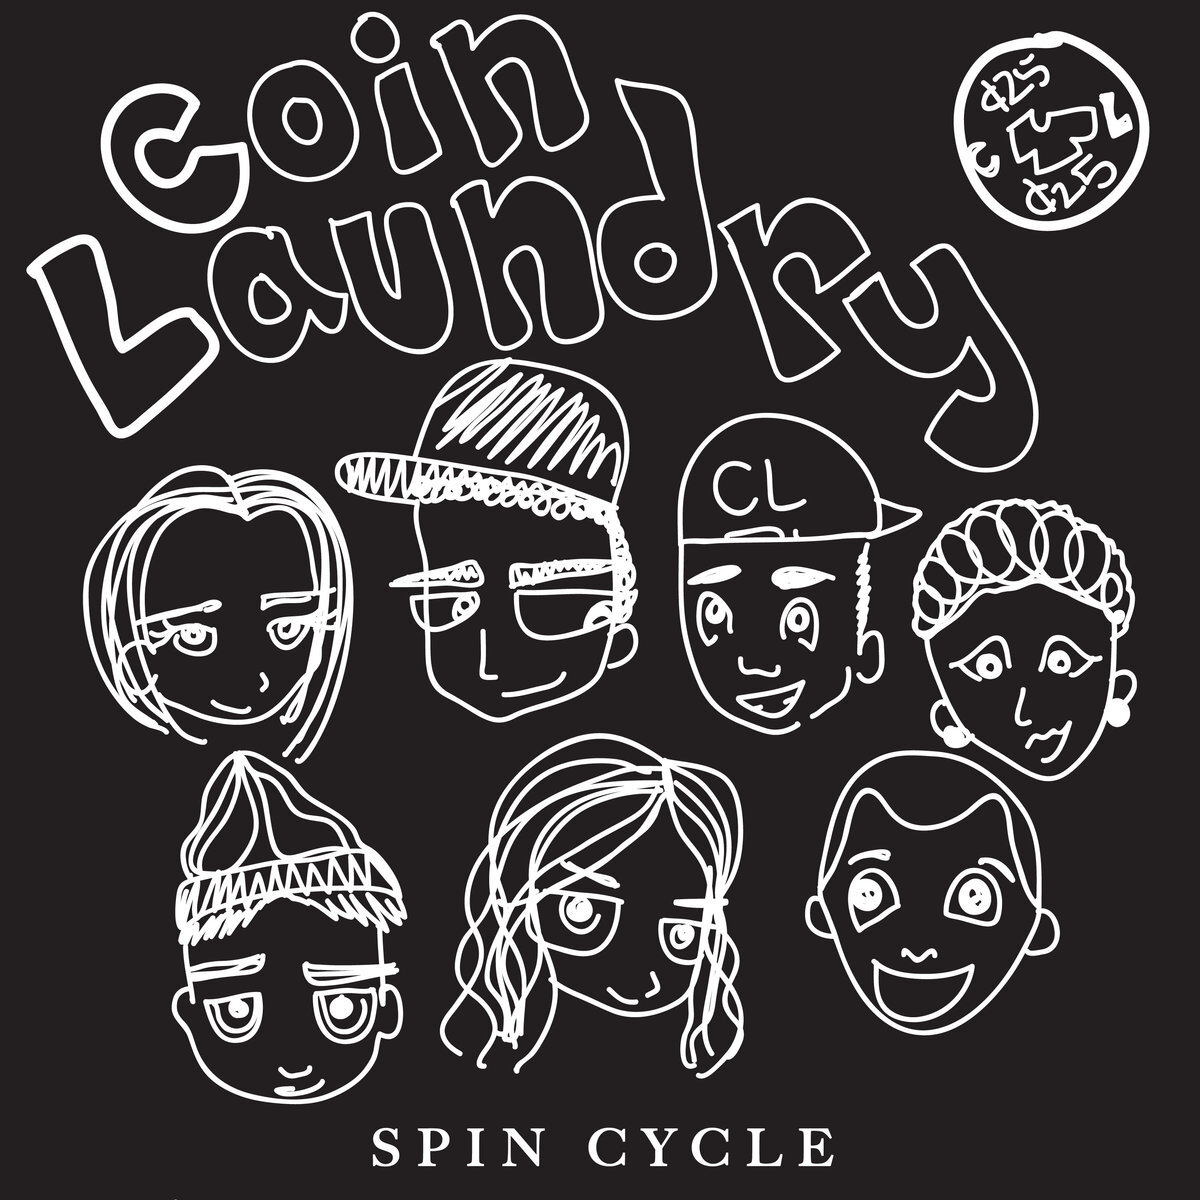 Spin Cycle - COINLAUNDRY